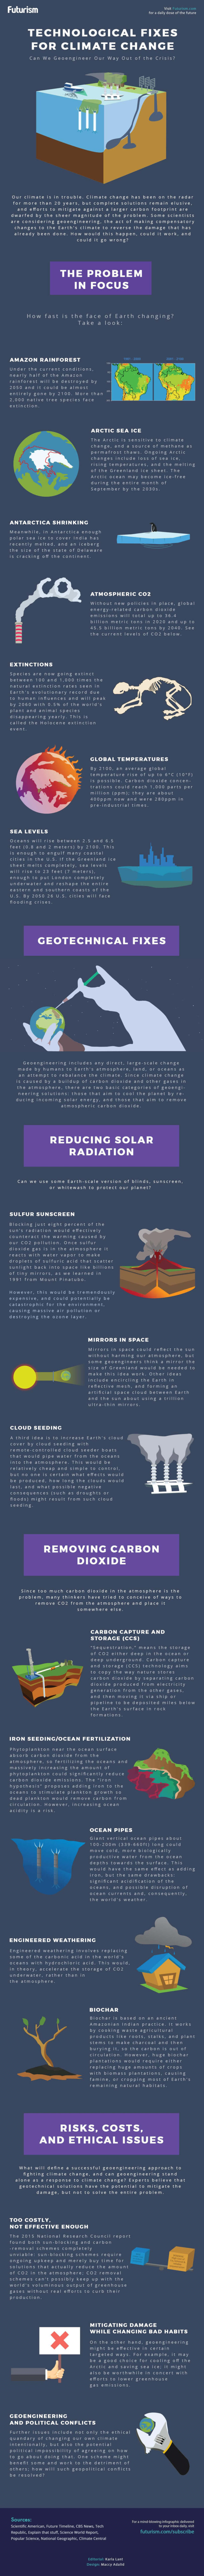 Technological Fixes for Climate Change - infographic